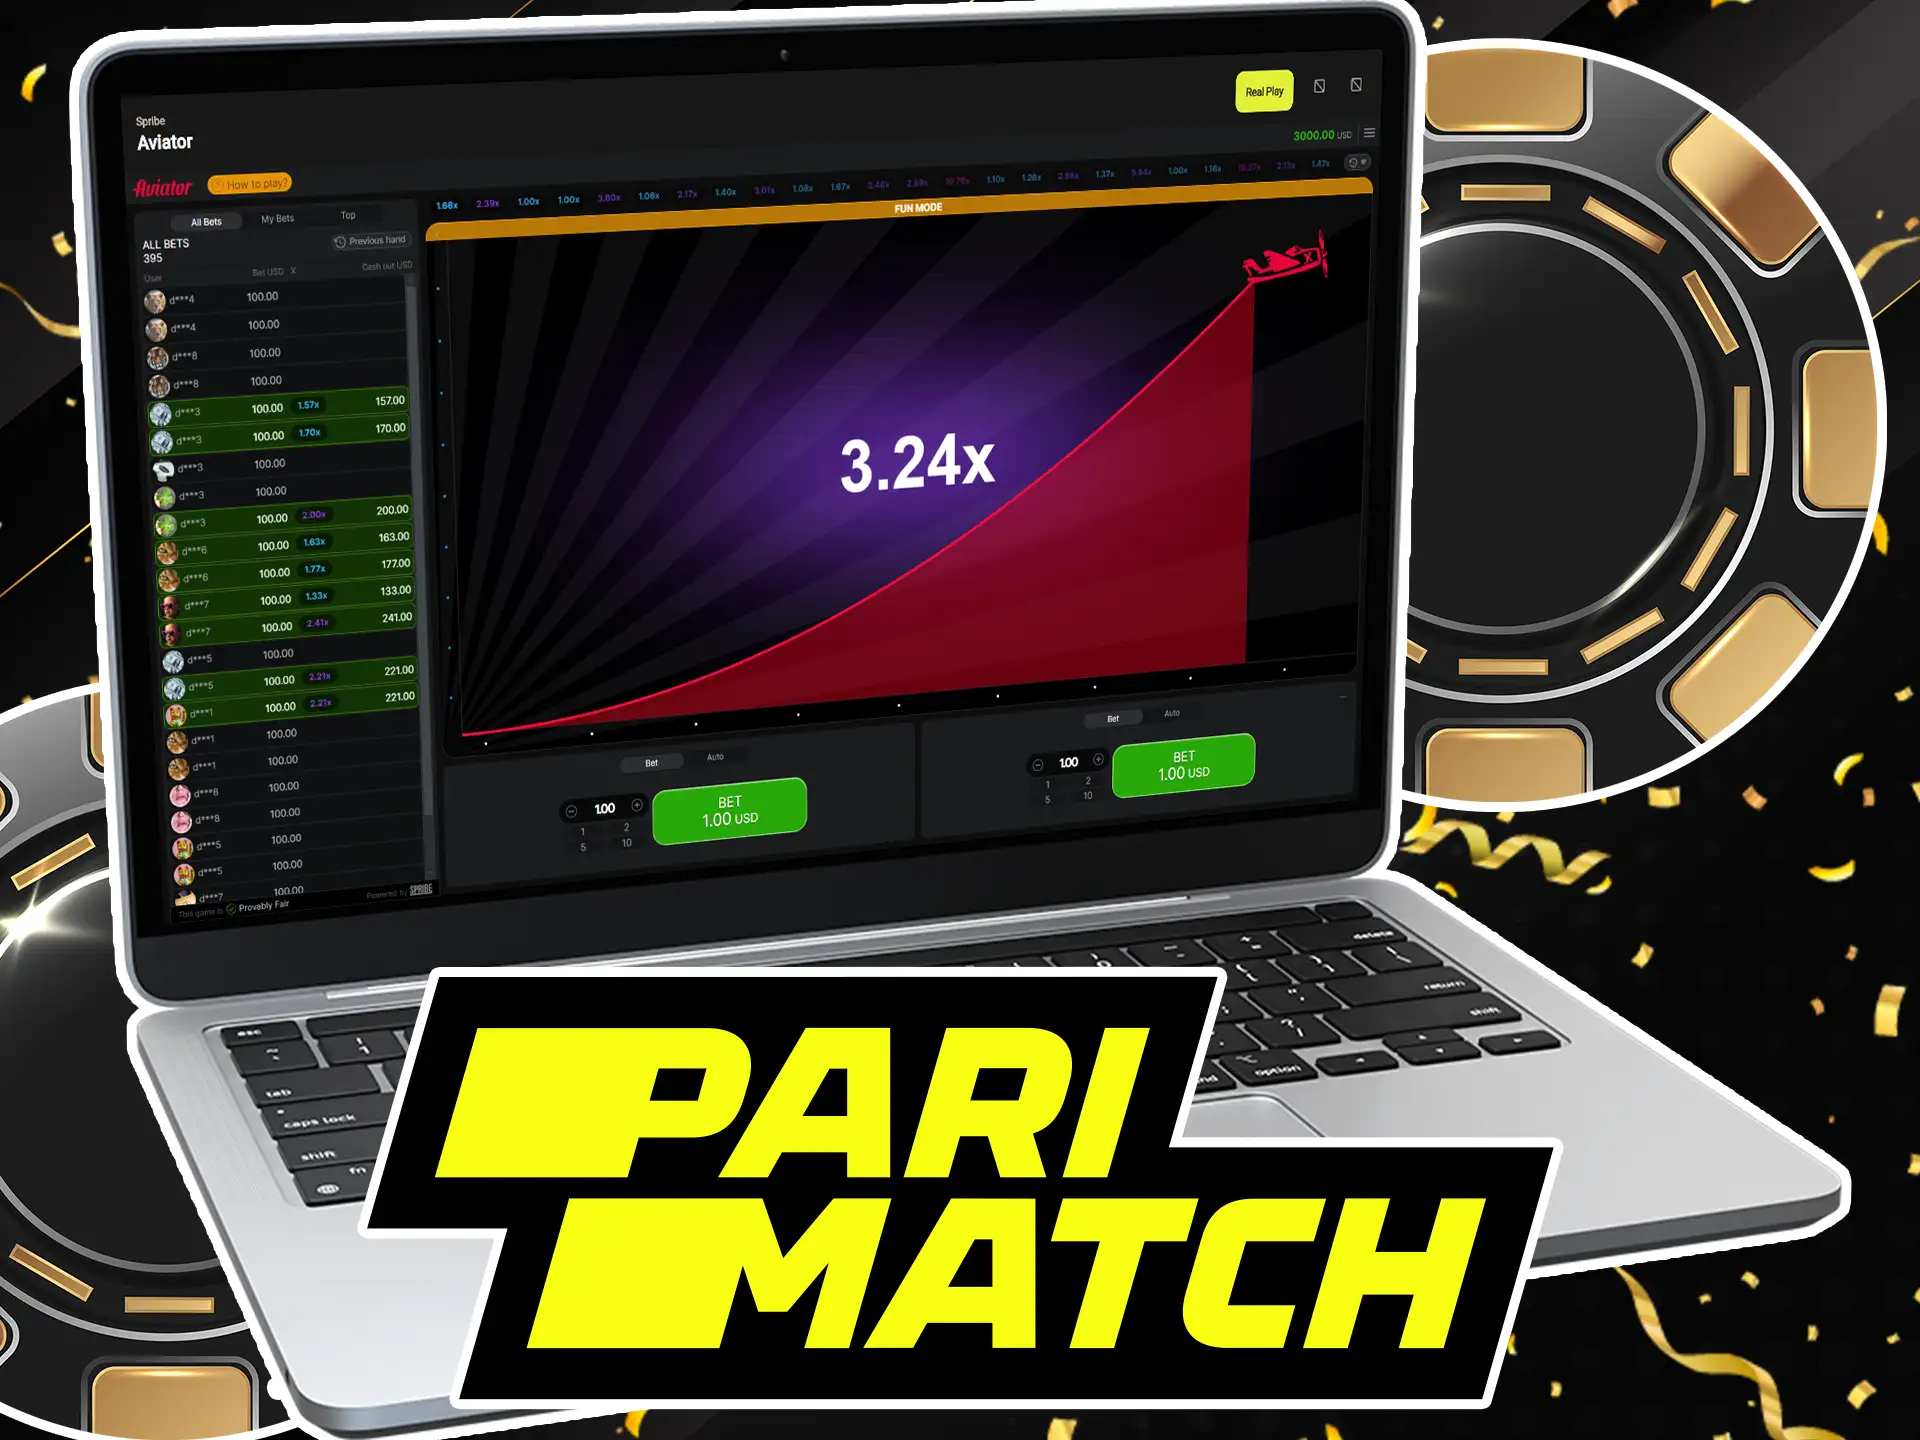 Aviator at Parimatch combines simple gameplay with the chance to win big.